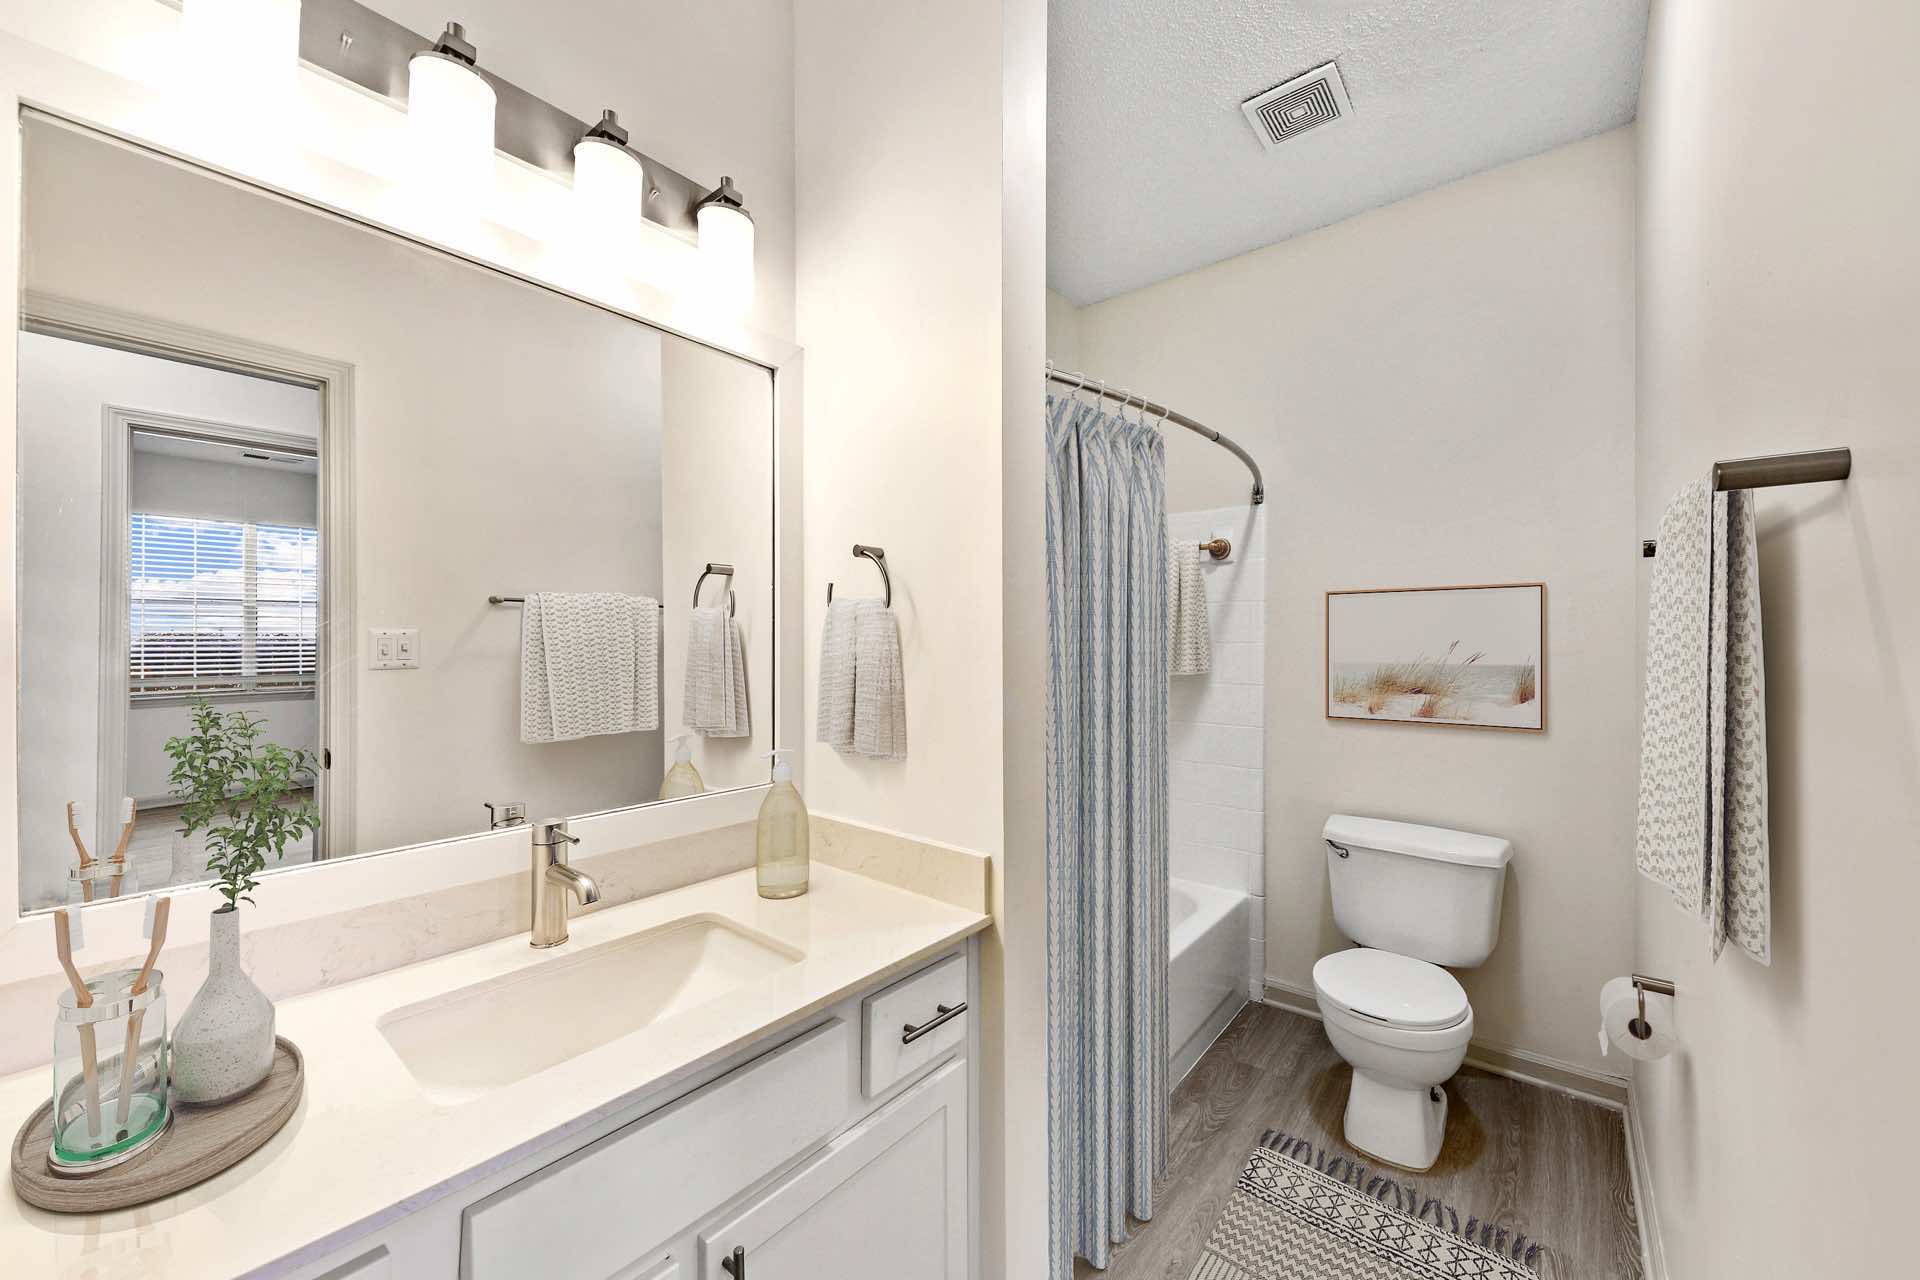 updated bathroom with ample lighting and wood-style flooring